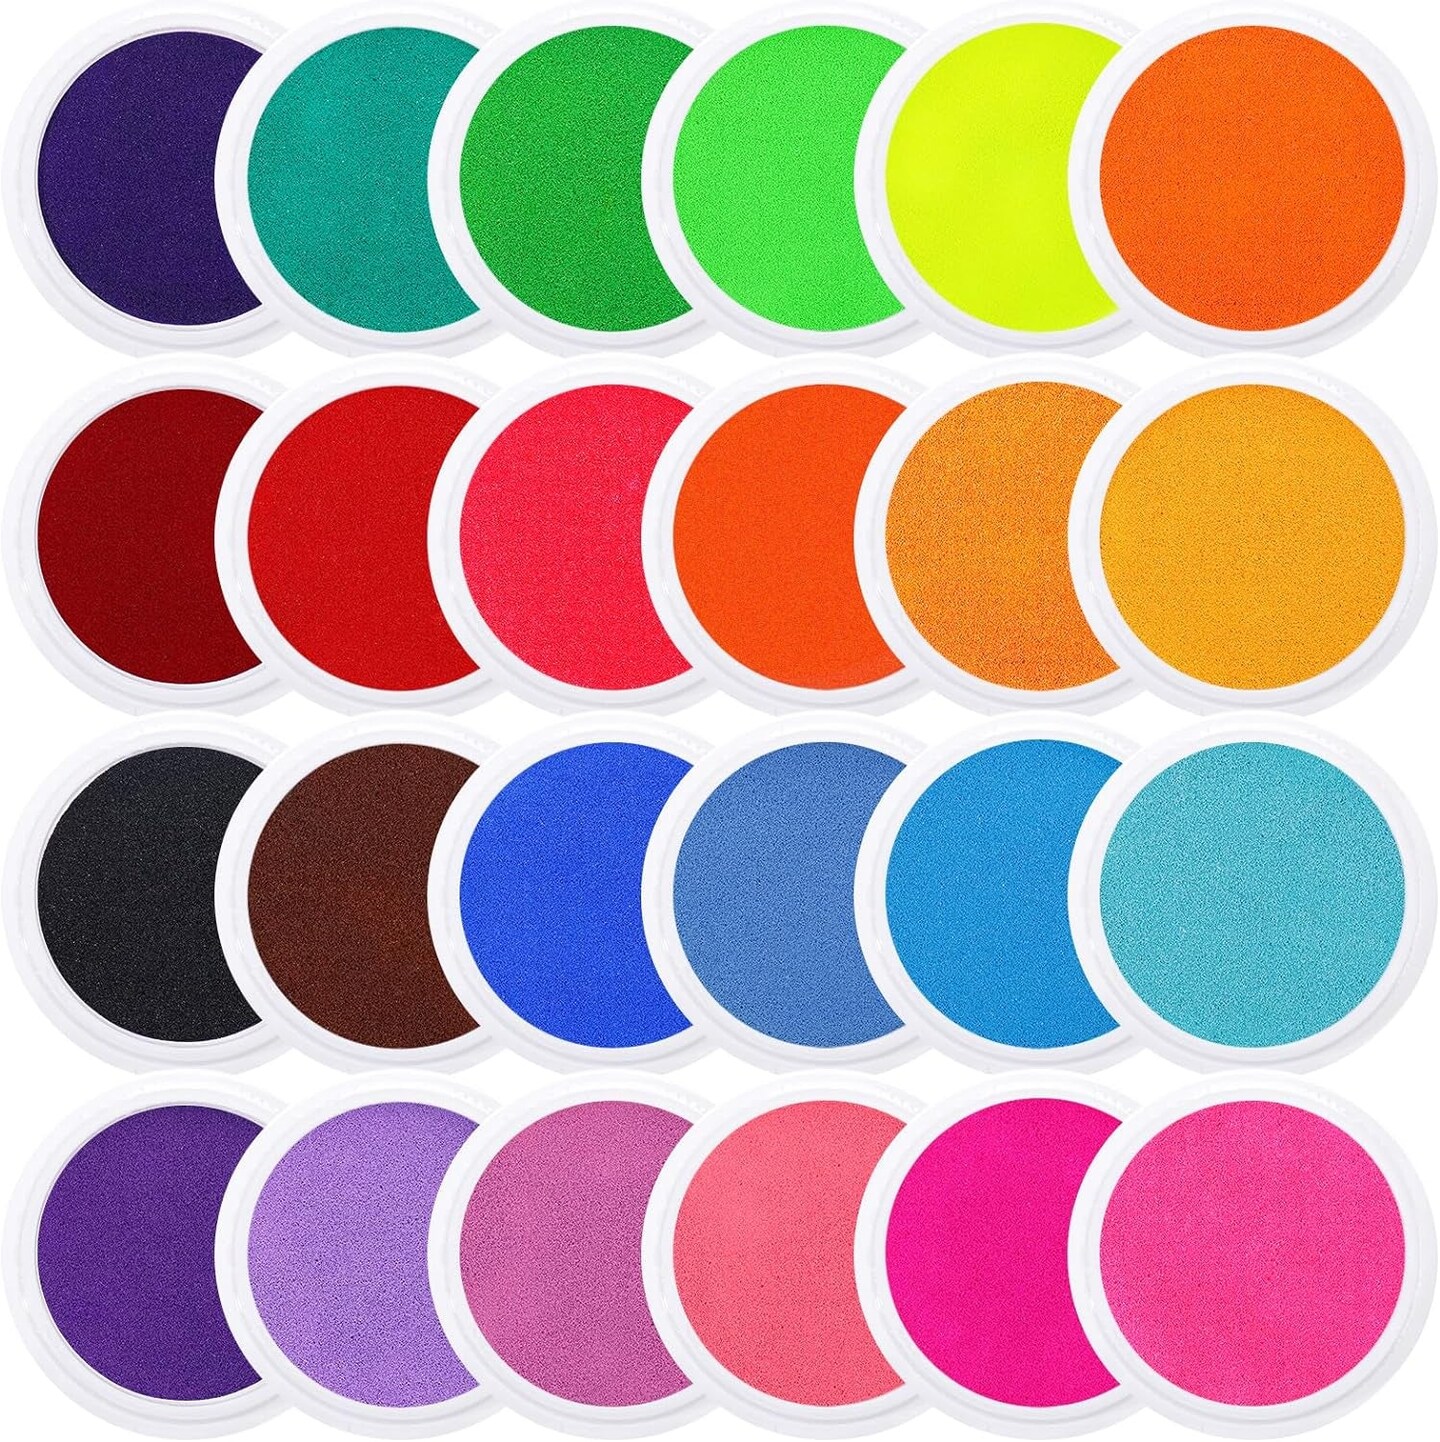 Lot of 8 Various Color Ink Pads for Stamps Crafting Scrapbooking